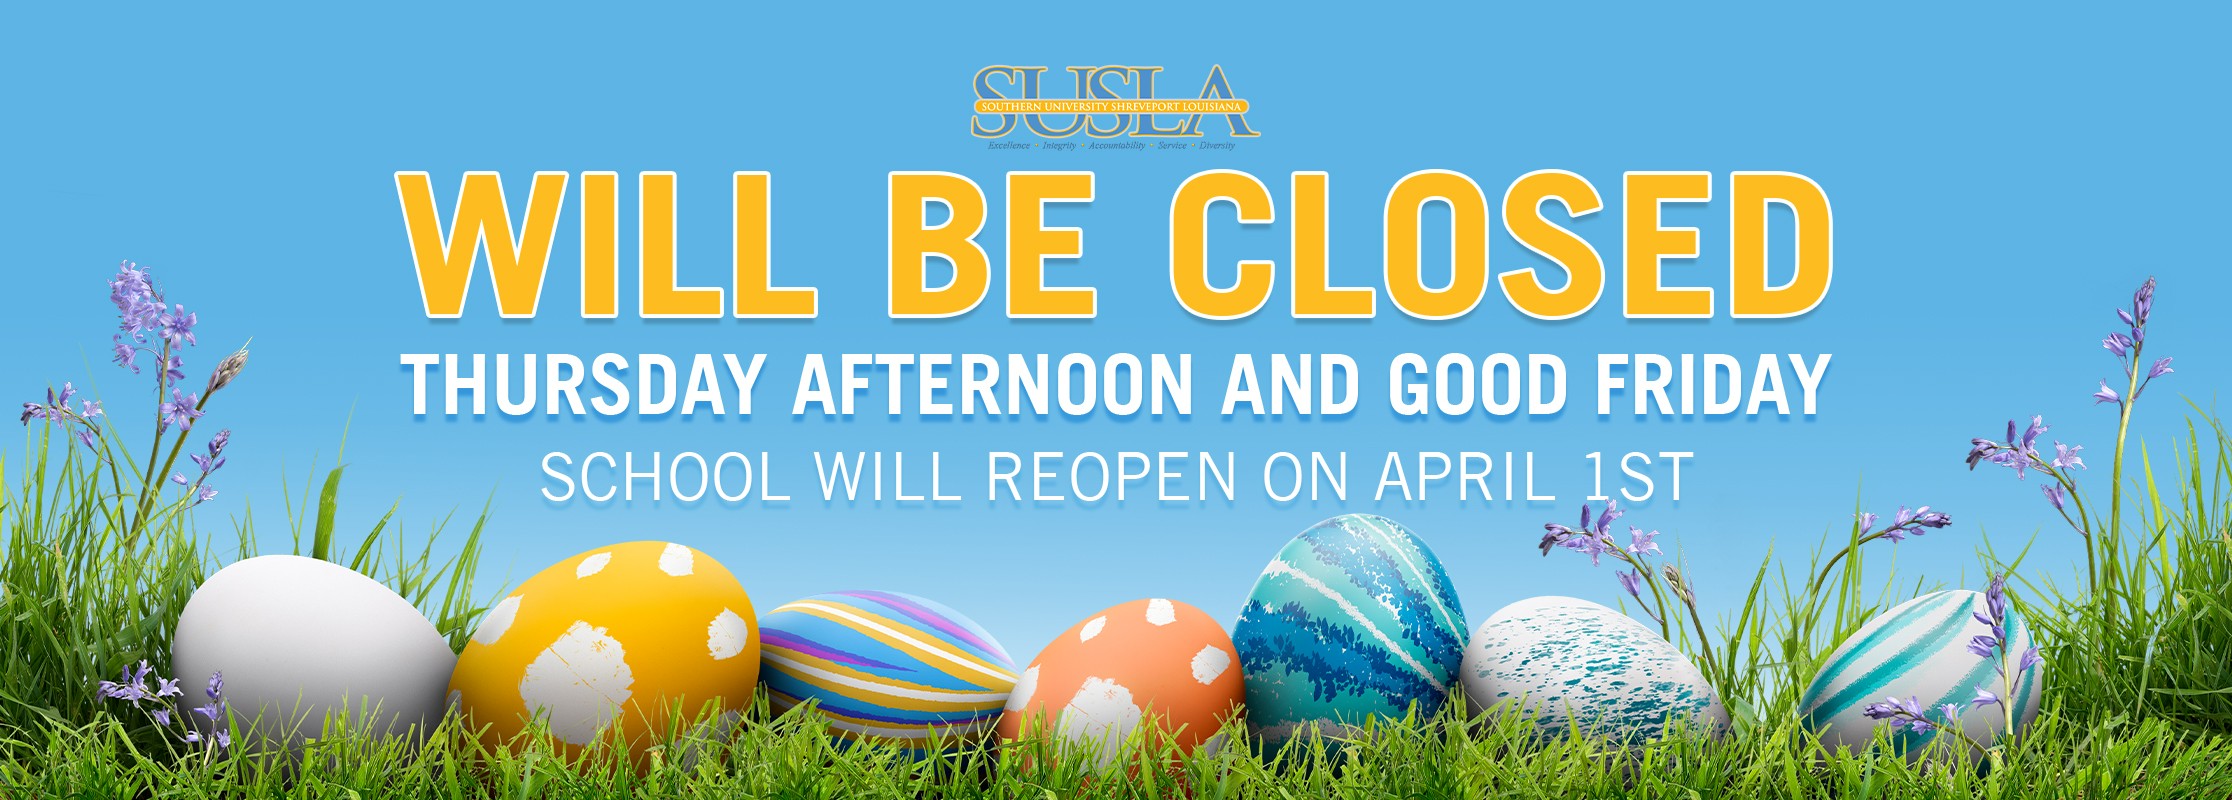 Spring background announcing School Closure for Good Friday